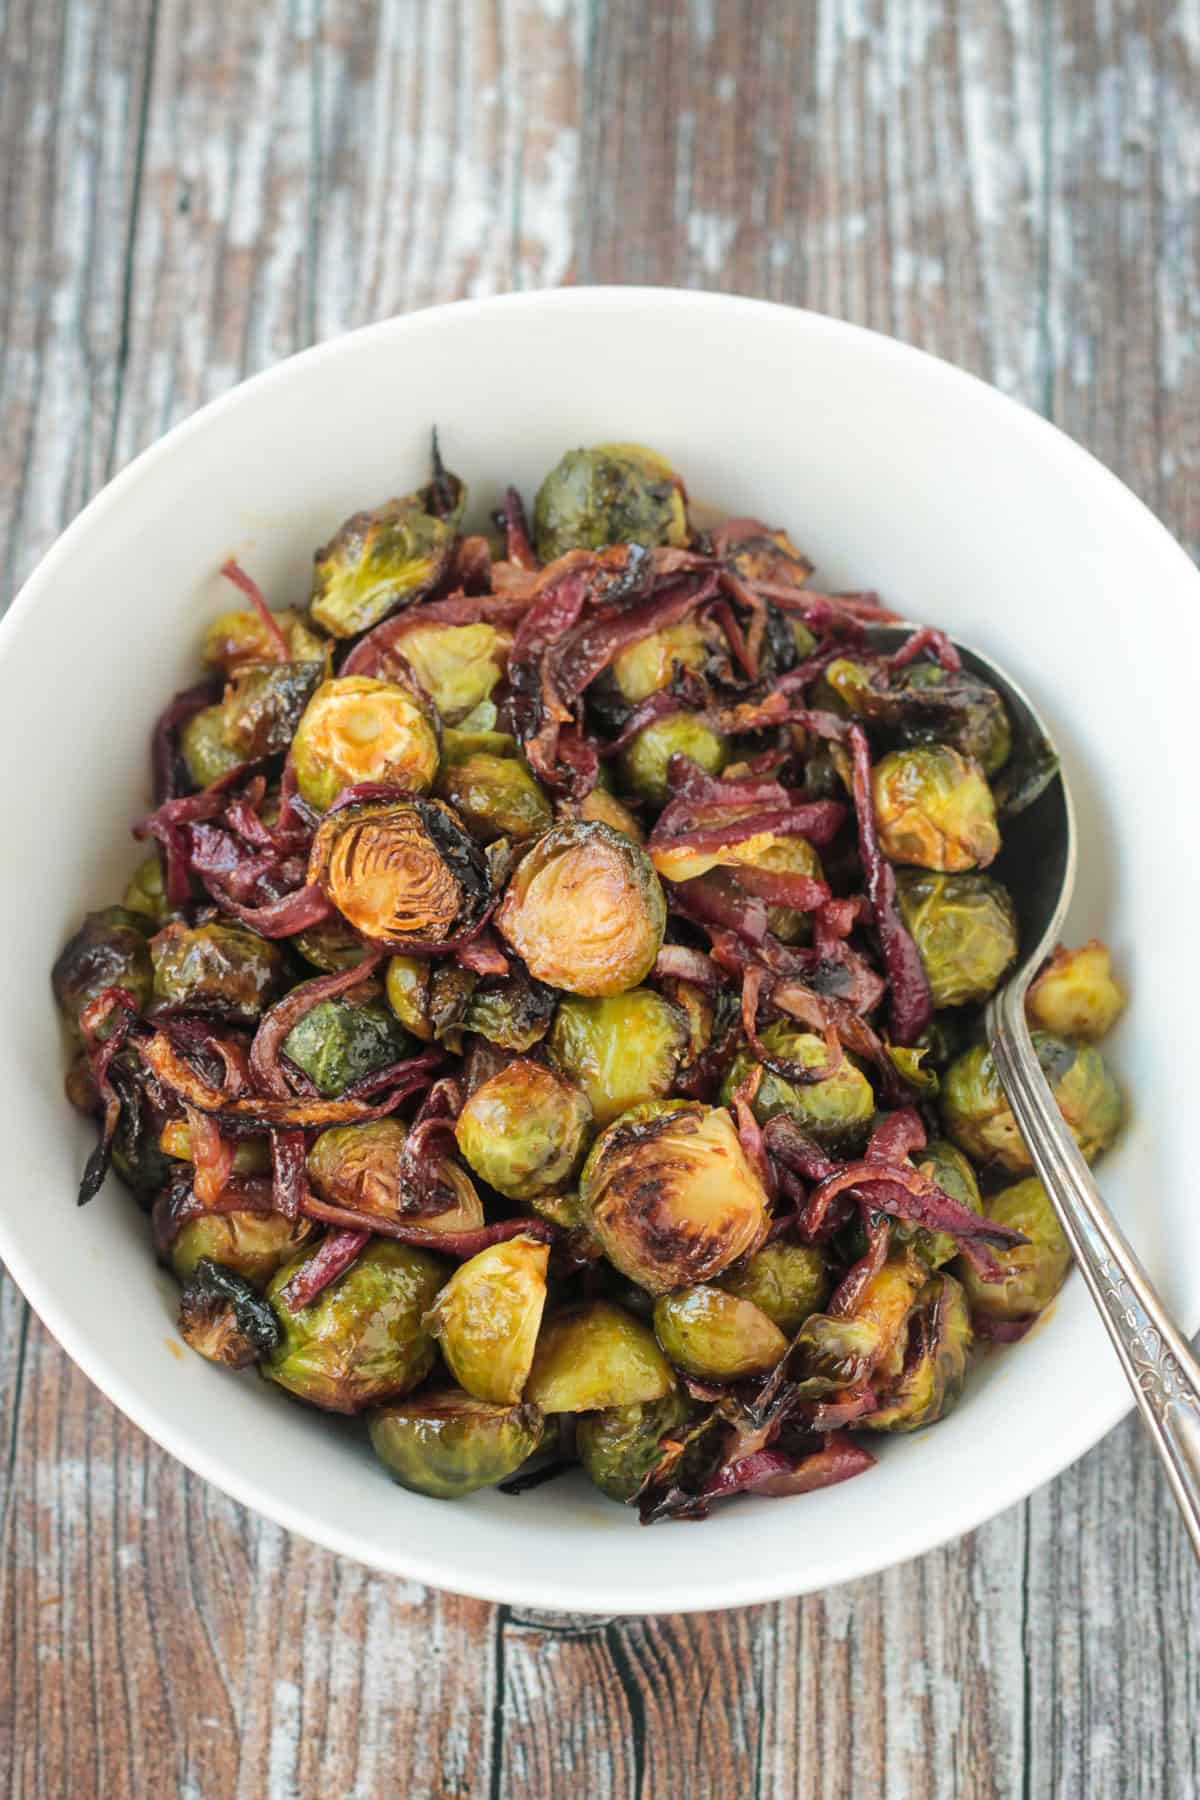 Balsamic glazed roasted sprouts and onions in a white serving bowl.